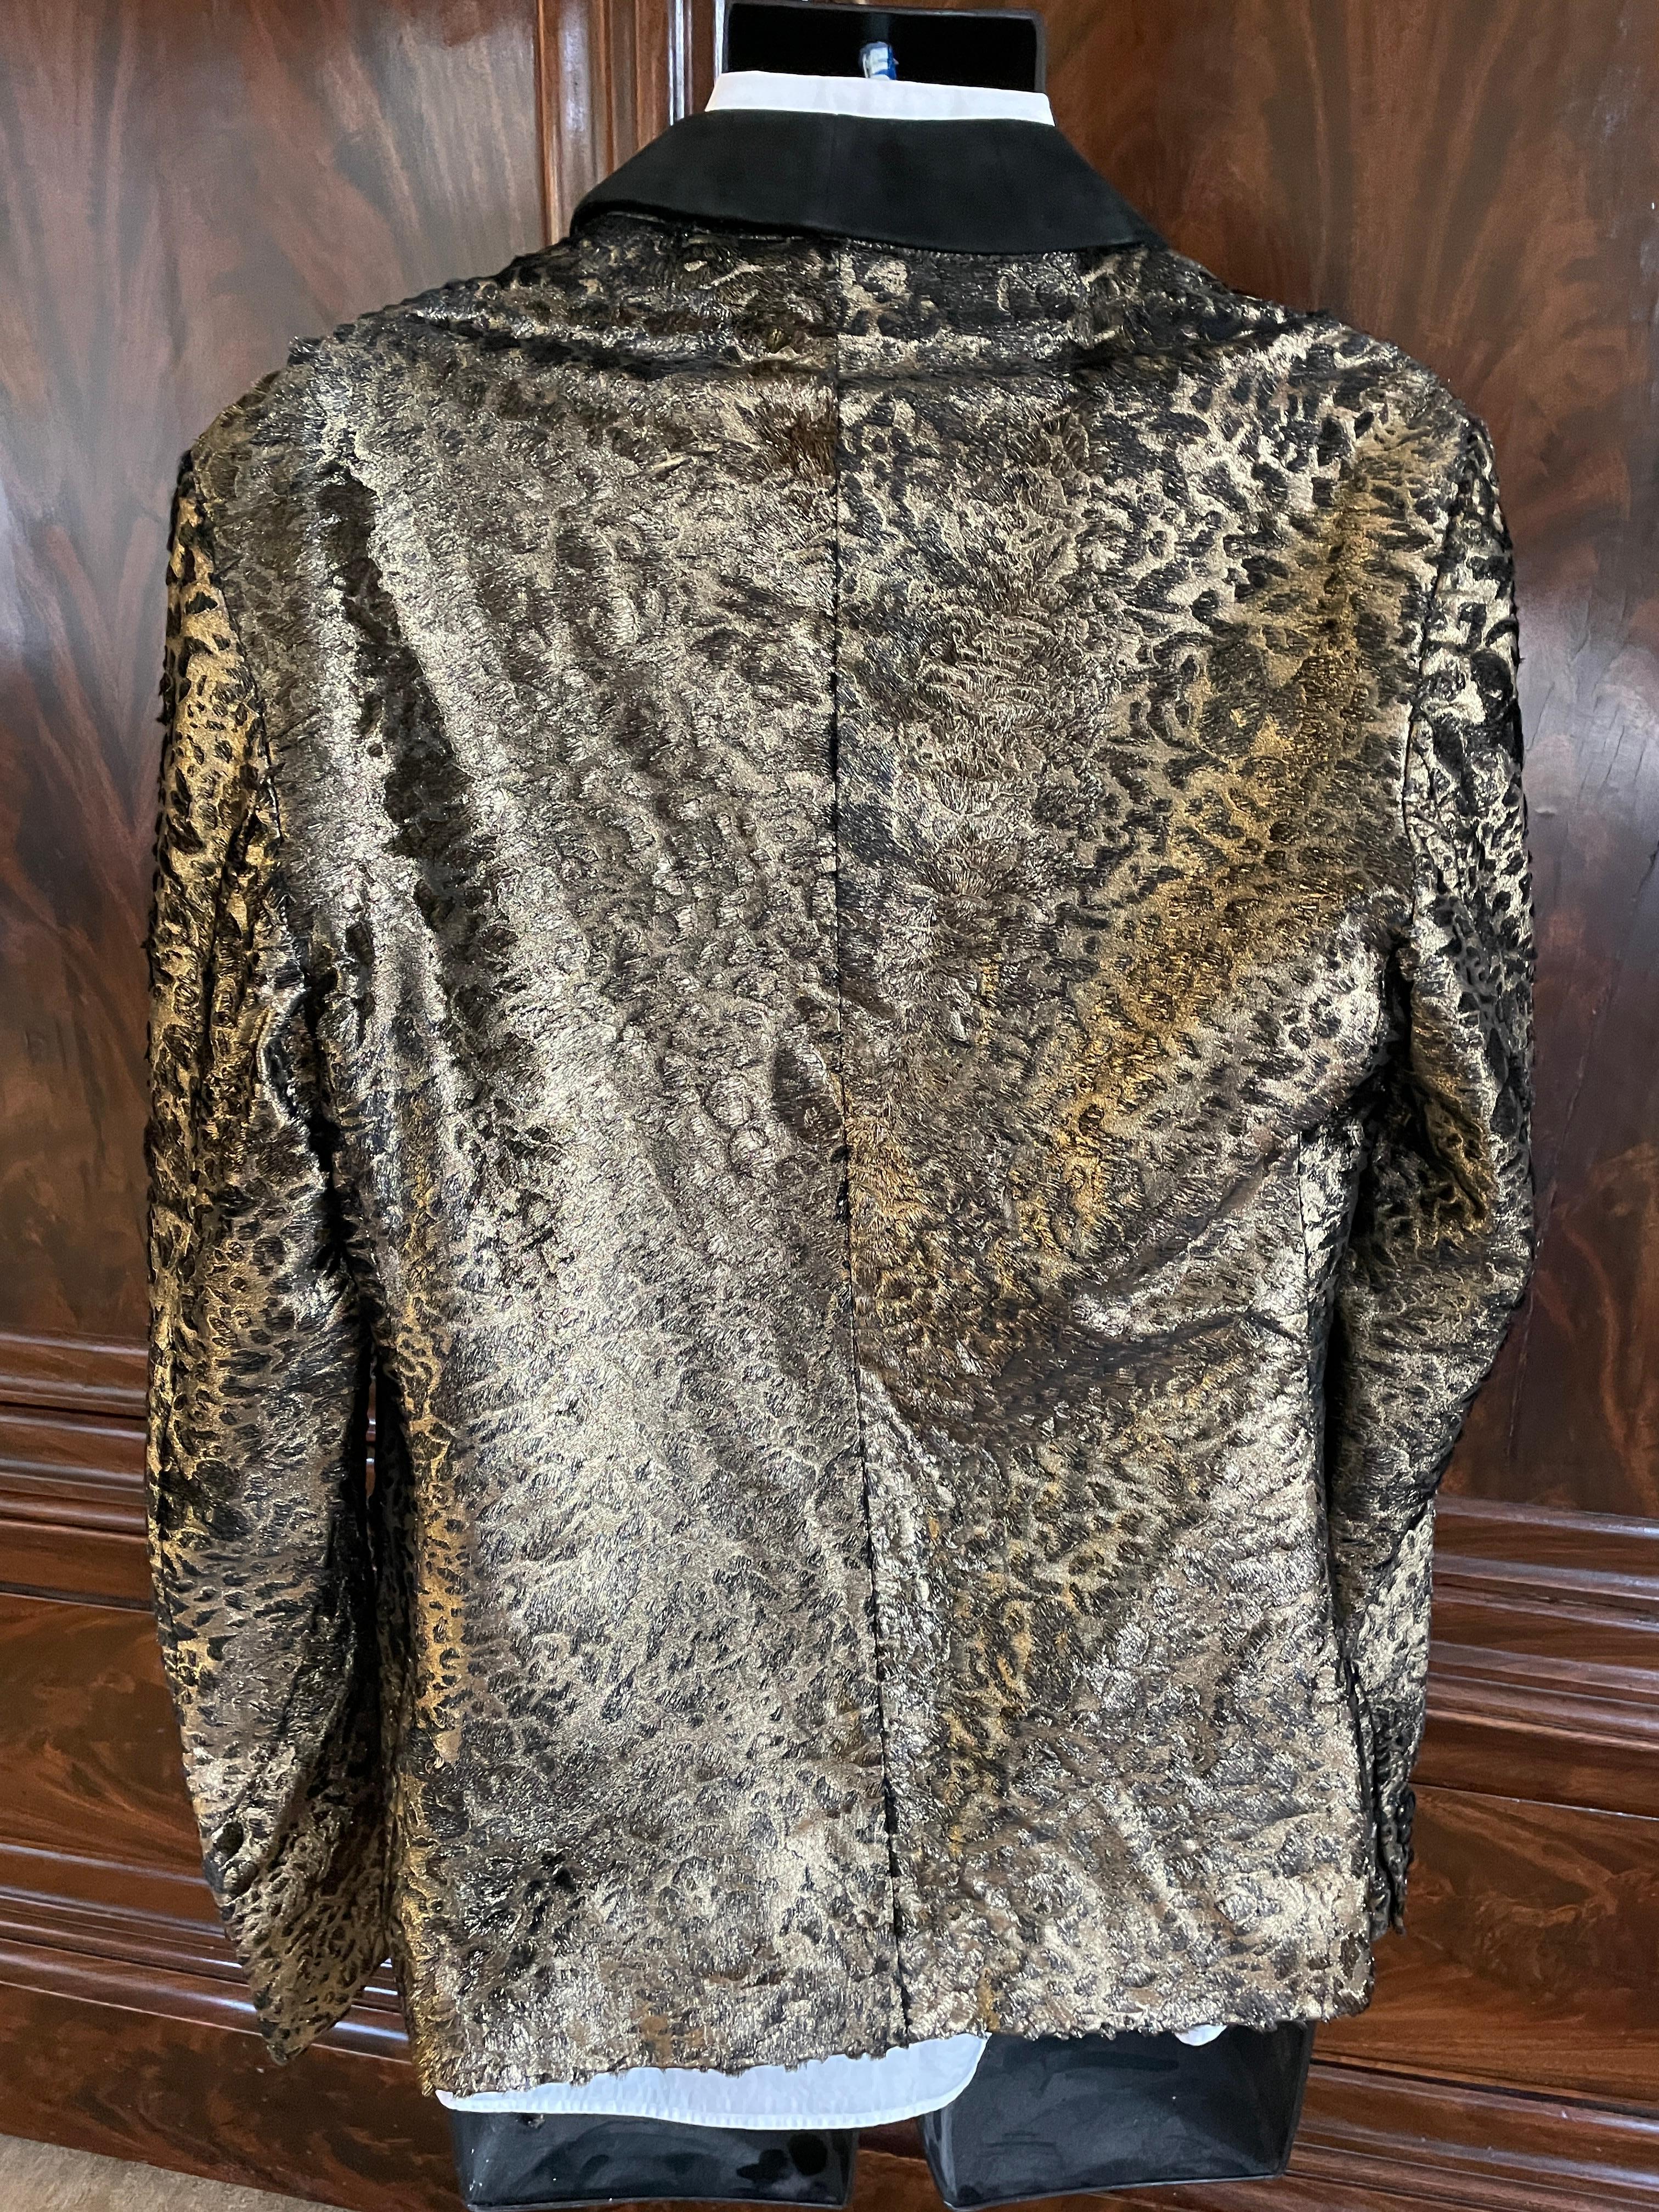 Roberto Cavalli Mens Gold Ponyskin Leather Jacket w Suede Lapels NWT $7775 For Sale 1